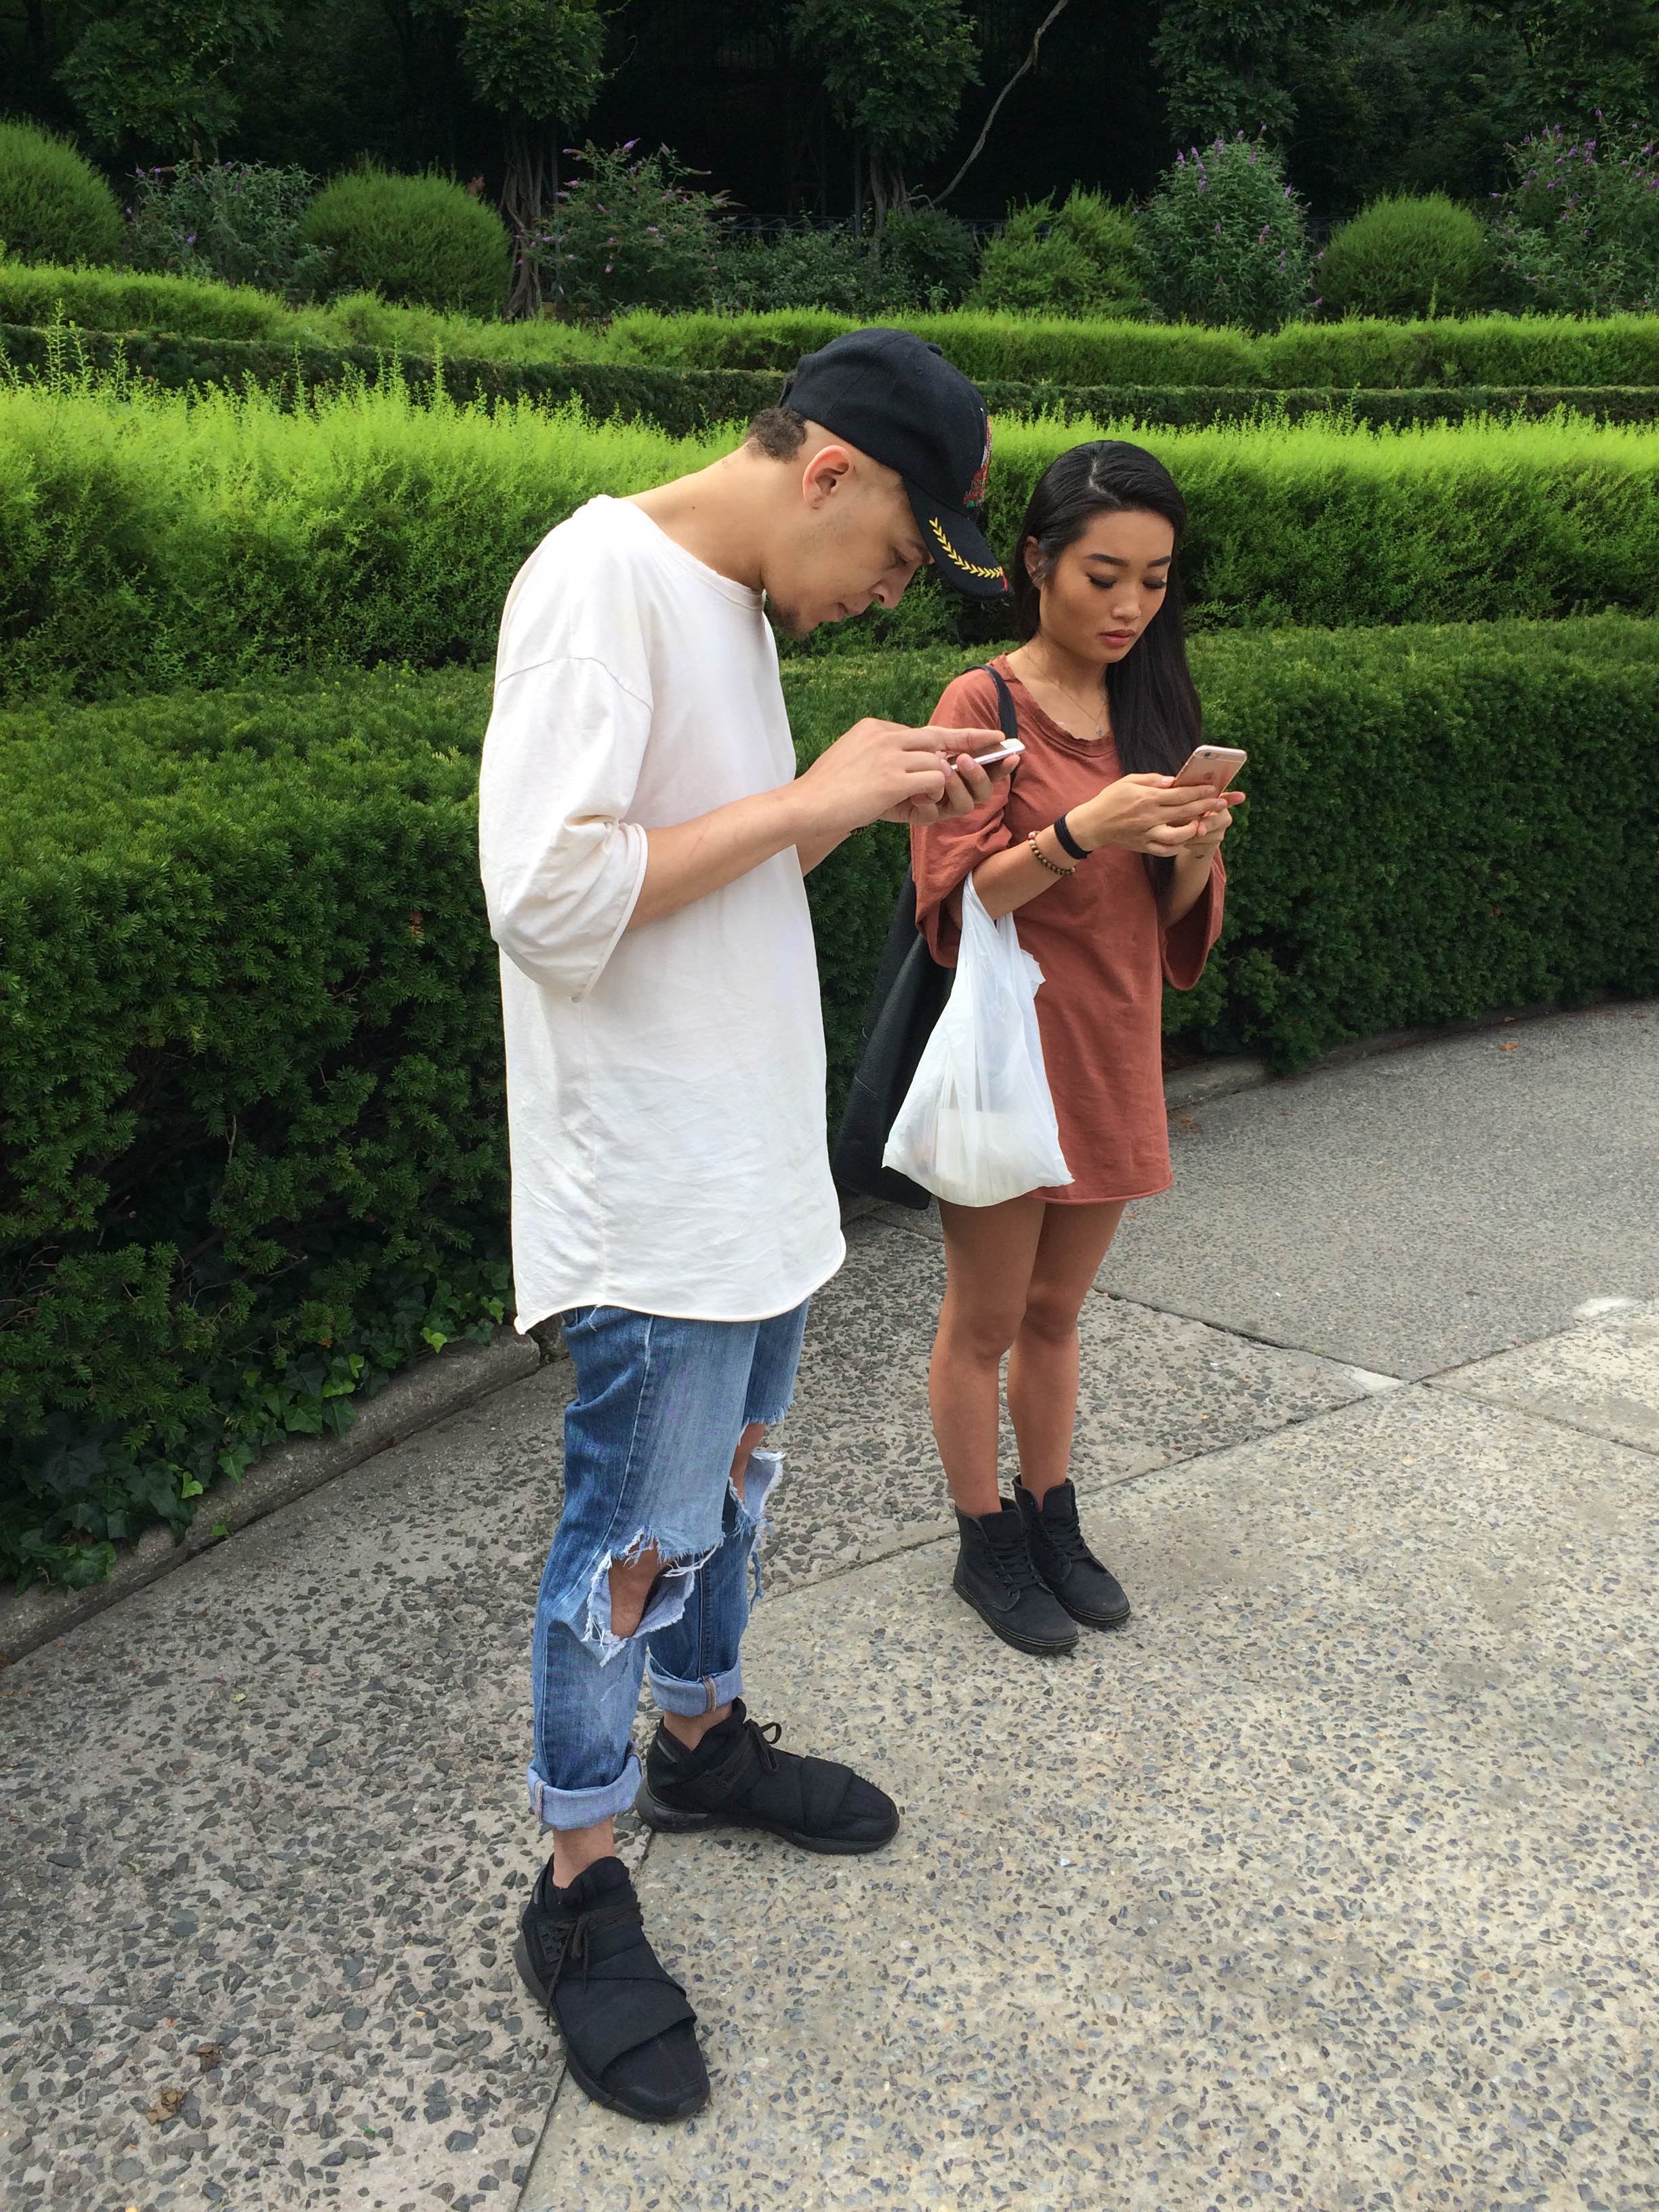 Team Mystic members Soyeon (20) and Frenlly (25) catch Pokemon at the Central Park Conservatory Garden last week. 